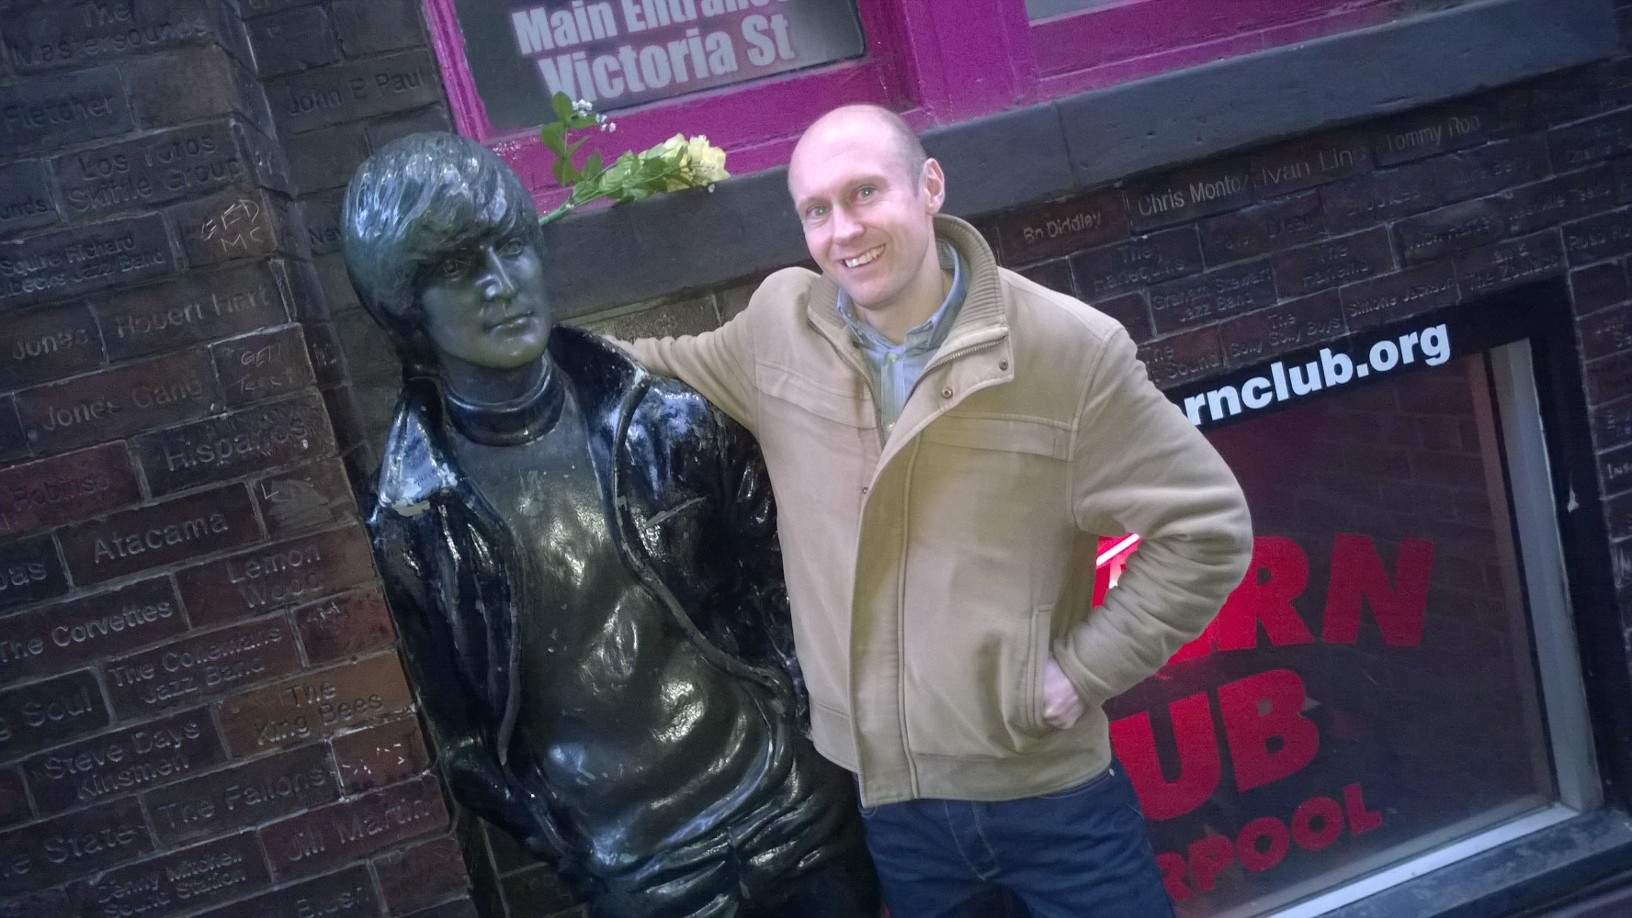 Neil Quigley in Liverpool